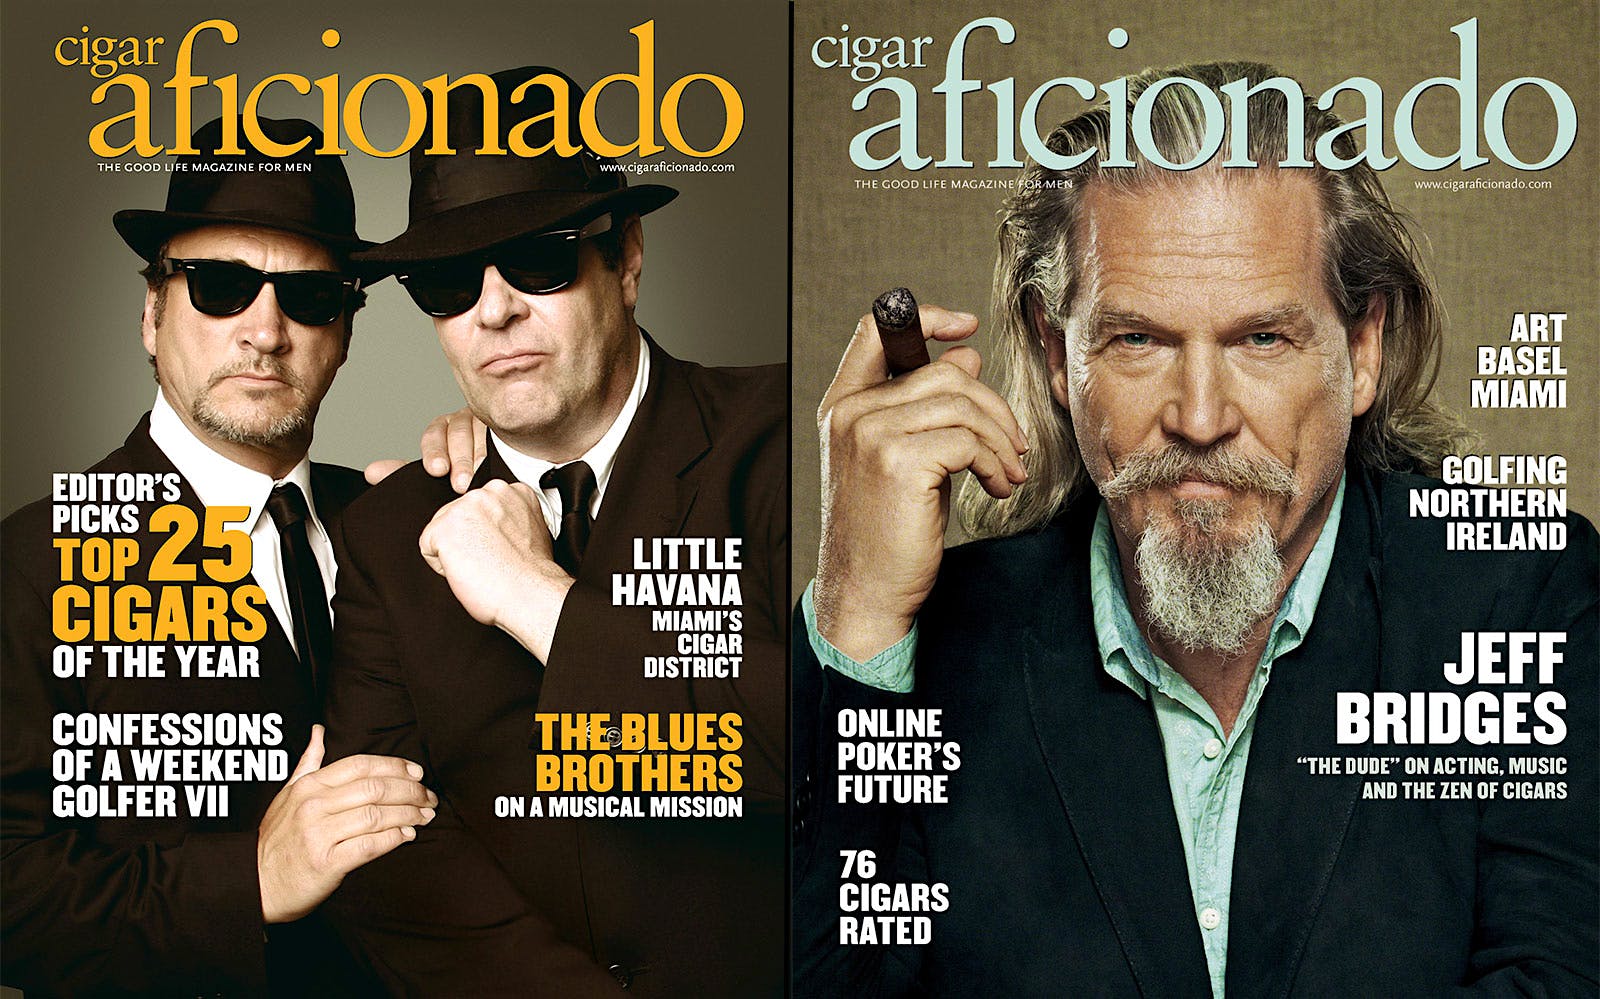 Round 2 pits The Blues Brothers (February 2008) against Jeff Bridges (August 2013) in a battle of the über-cool.